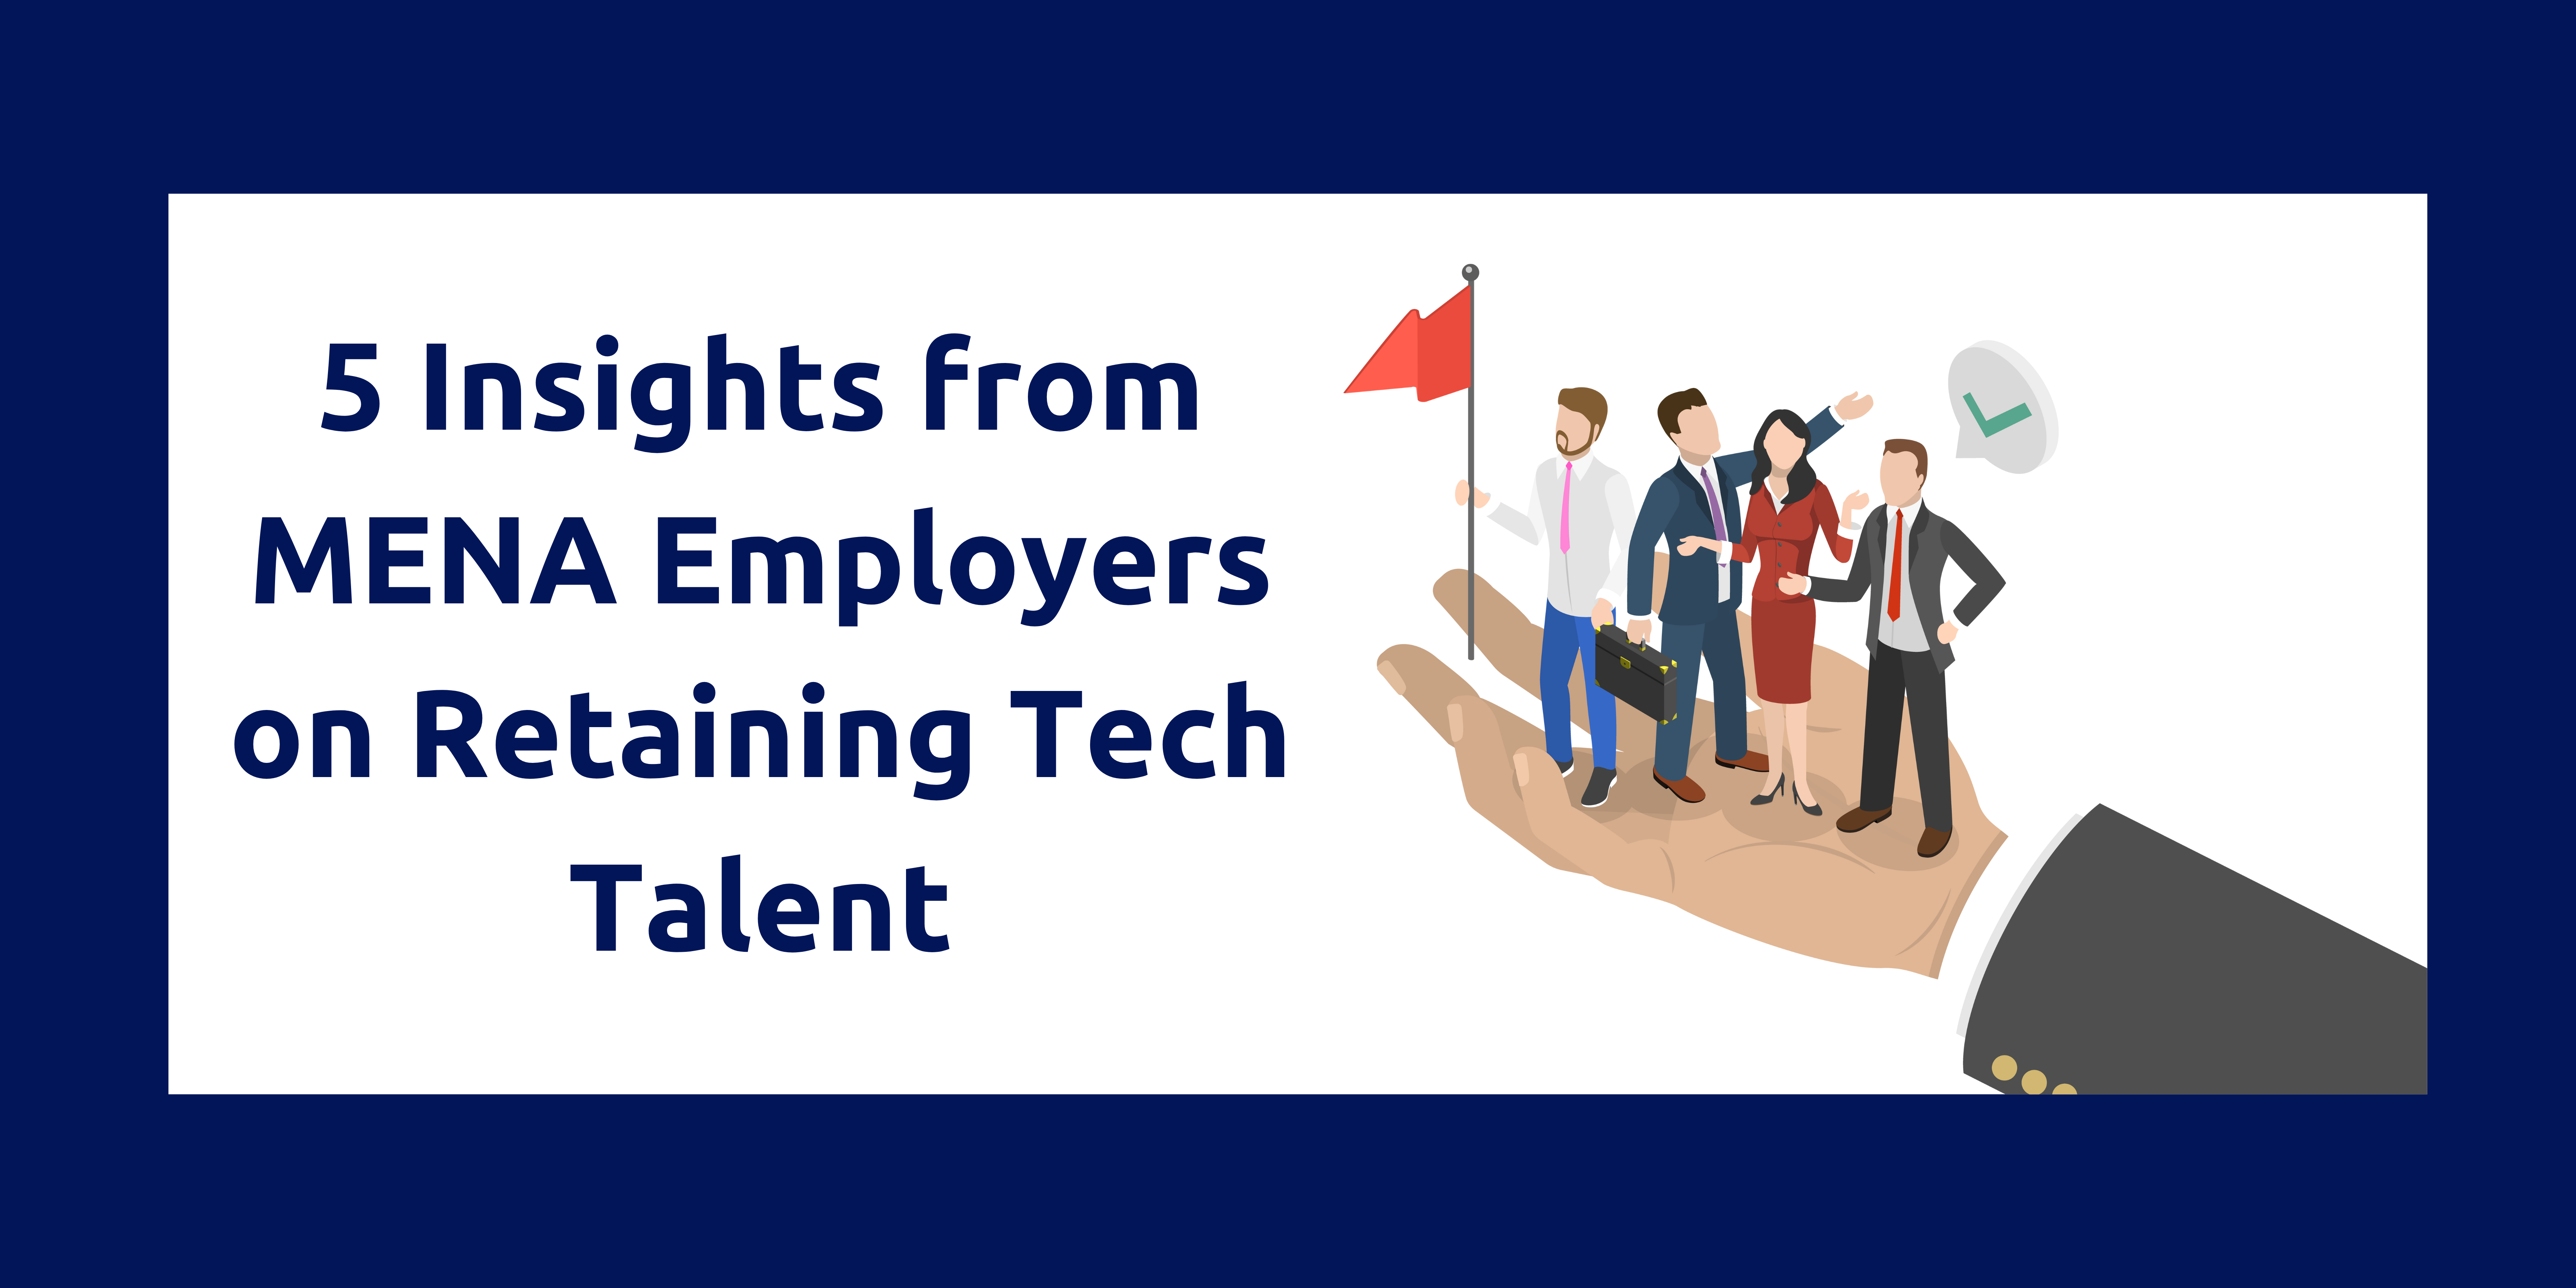 Insights from MENA employers blog banner